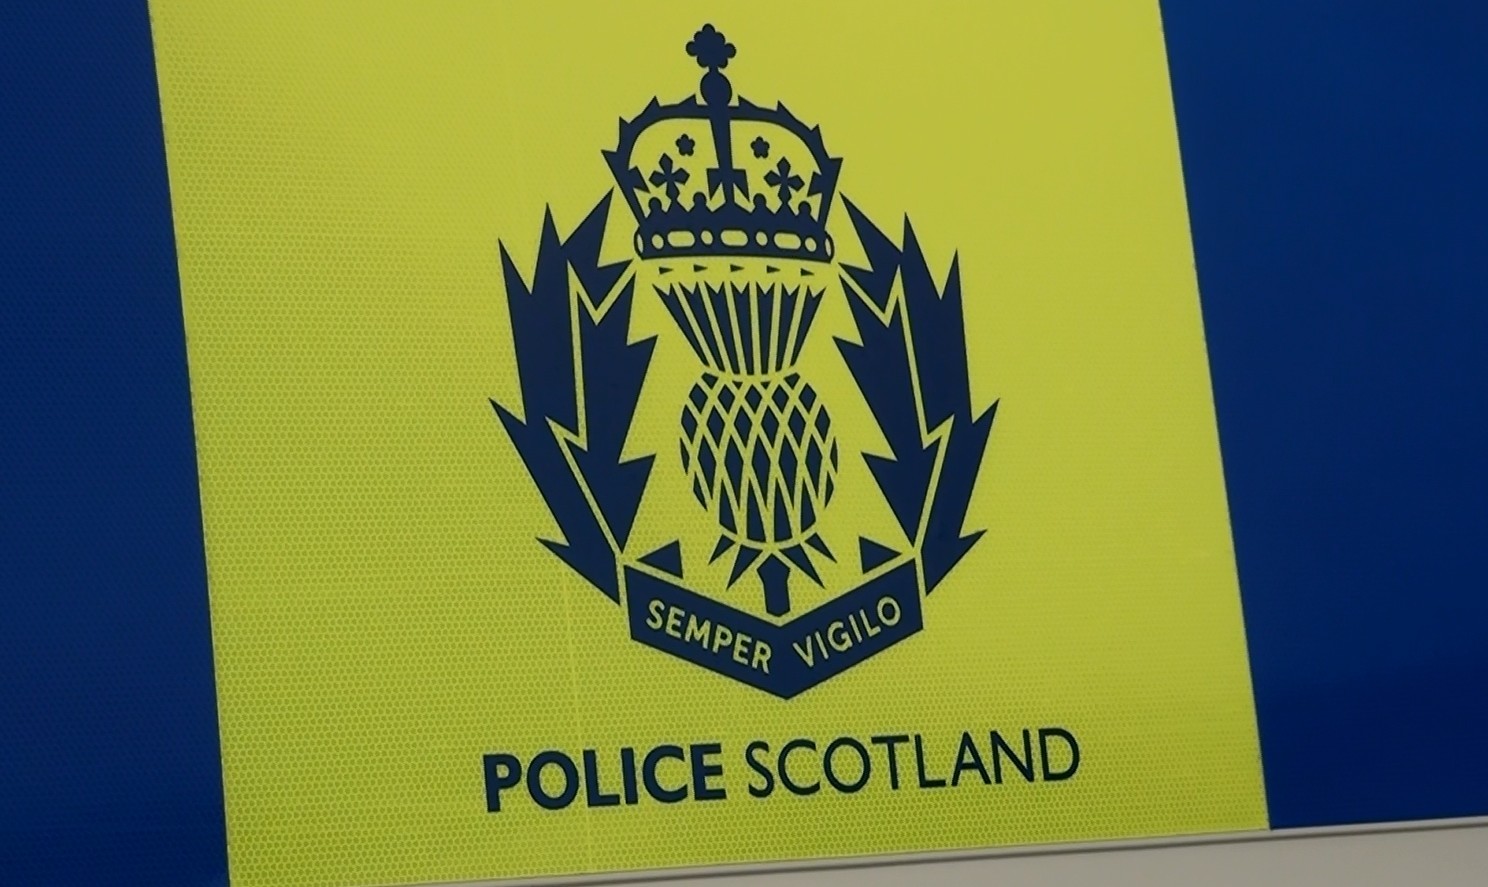 Police Scotland launched an investigation into the incident.